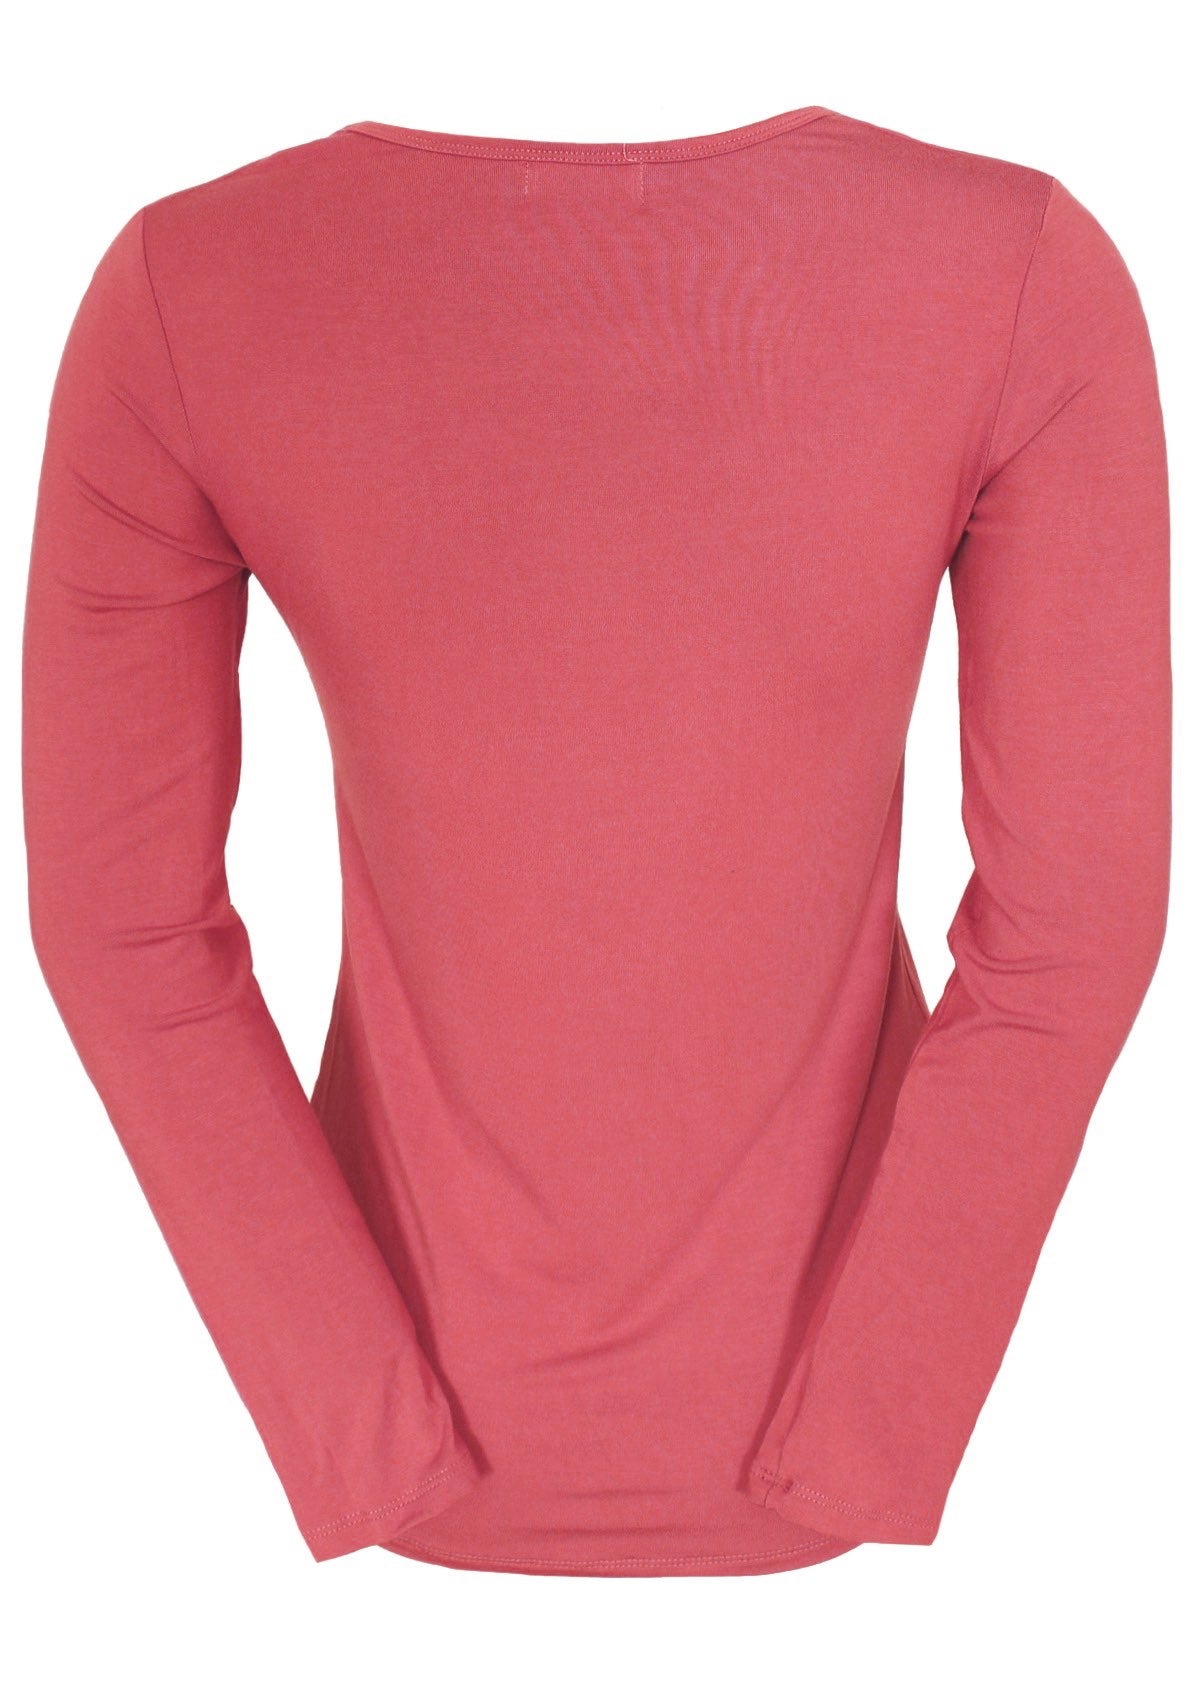 Back view of women's round neck pink long sleeve rayon top.